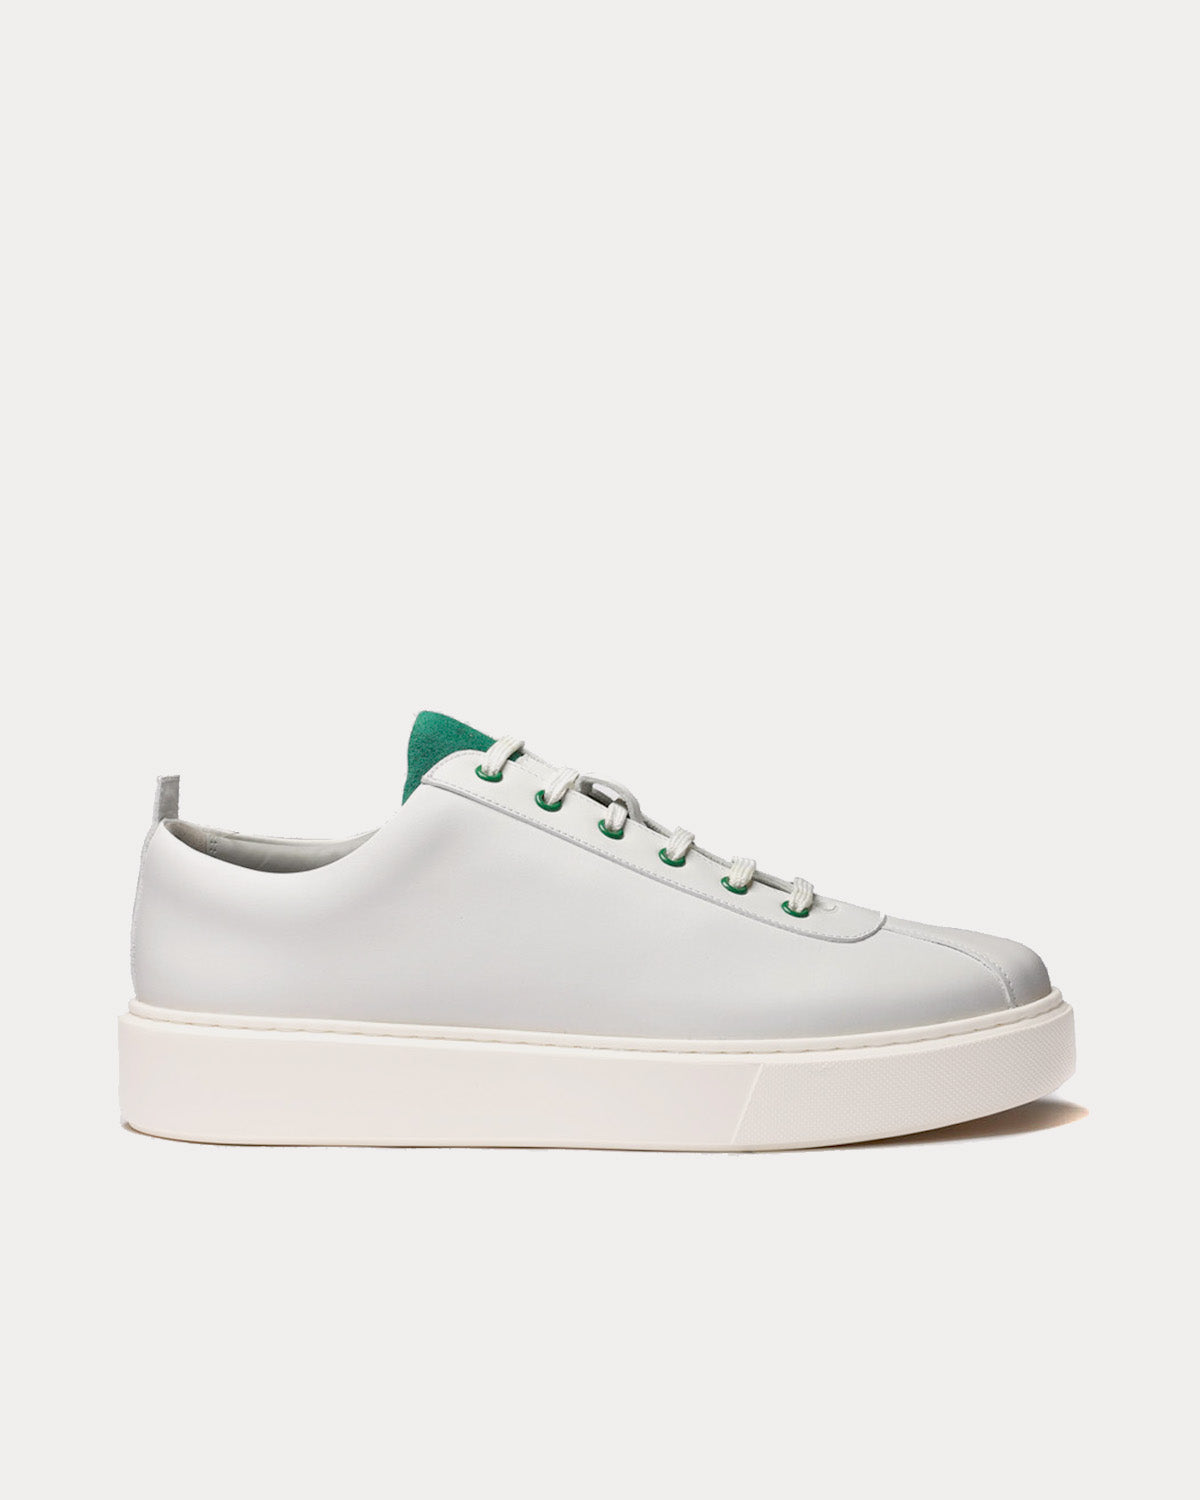 Grenson - Sneaker 30 Leather White / Green Low Top Sneakers